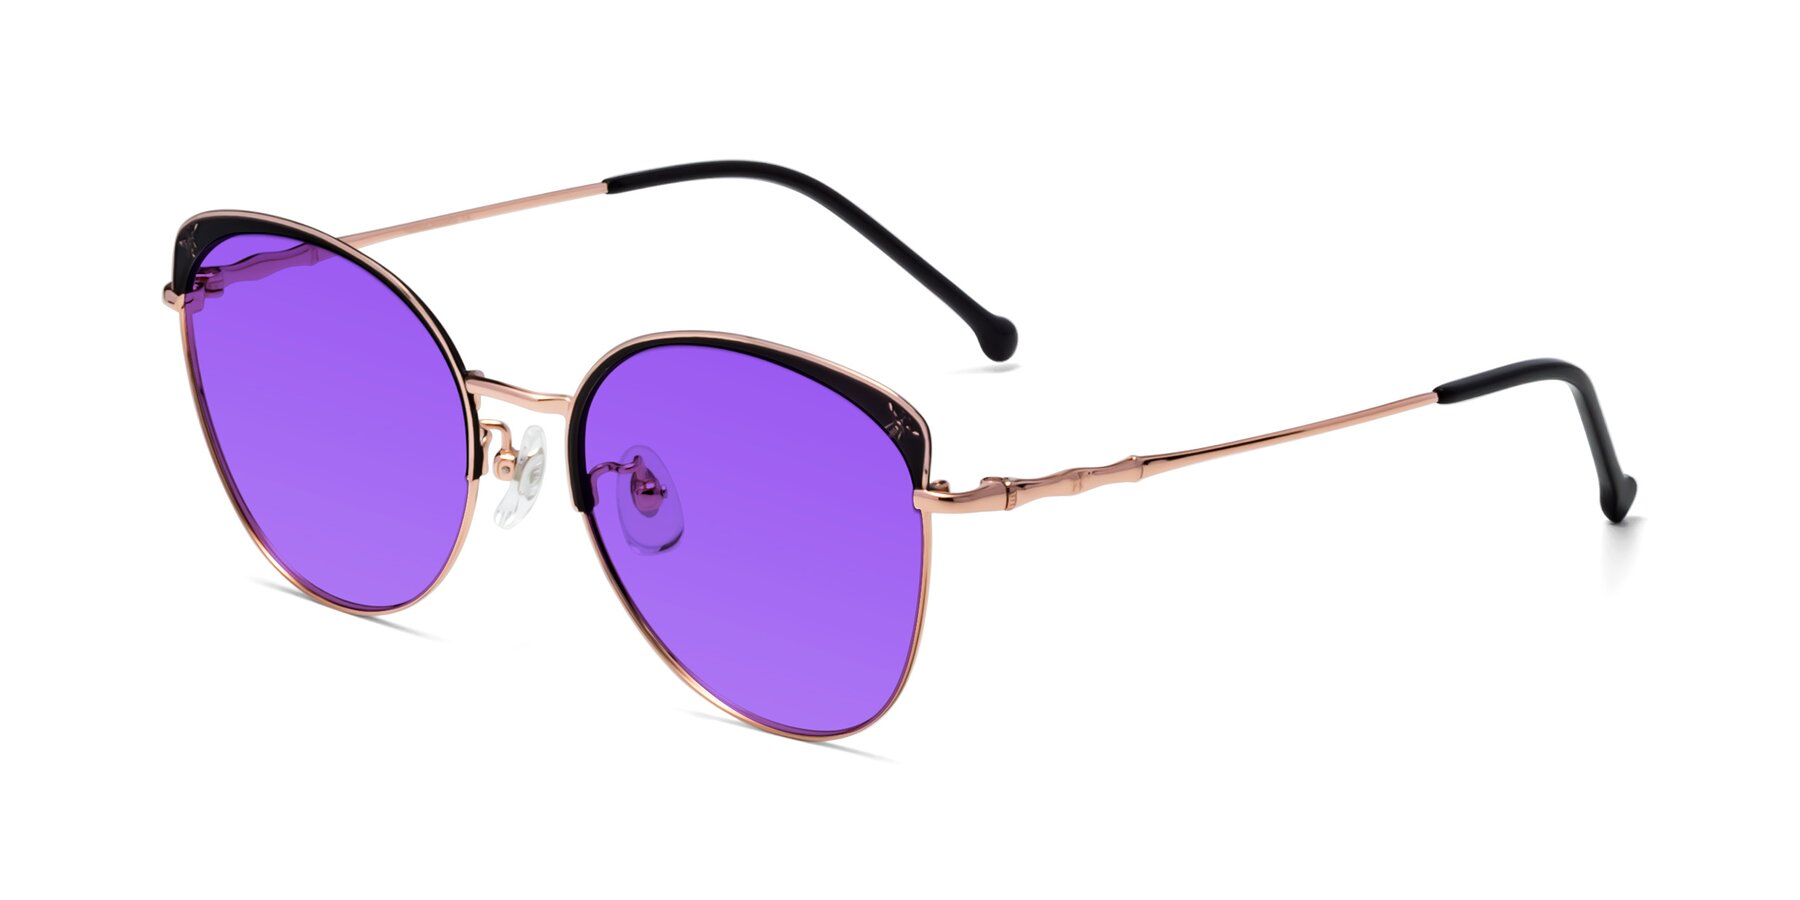 Angle of 18019 in Black-Rose Gold with Purple Tinted Lenses